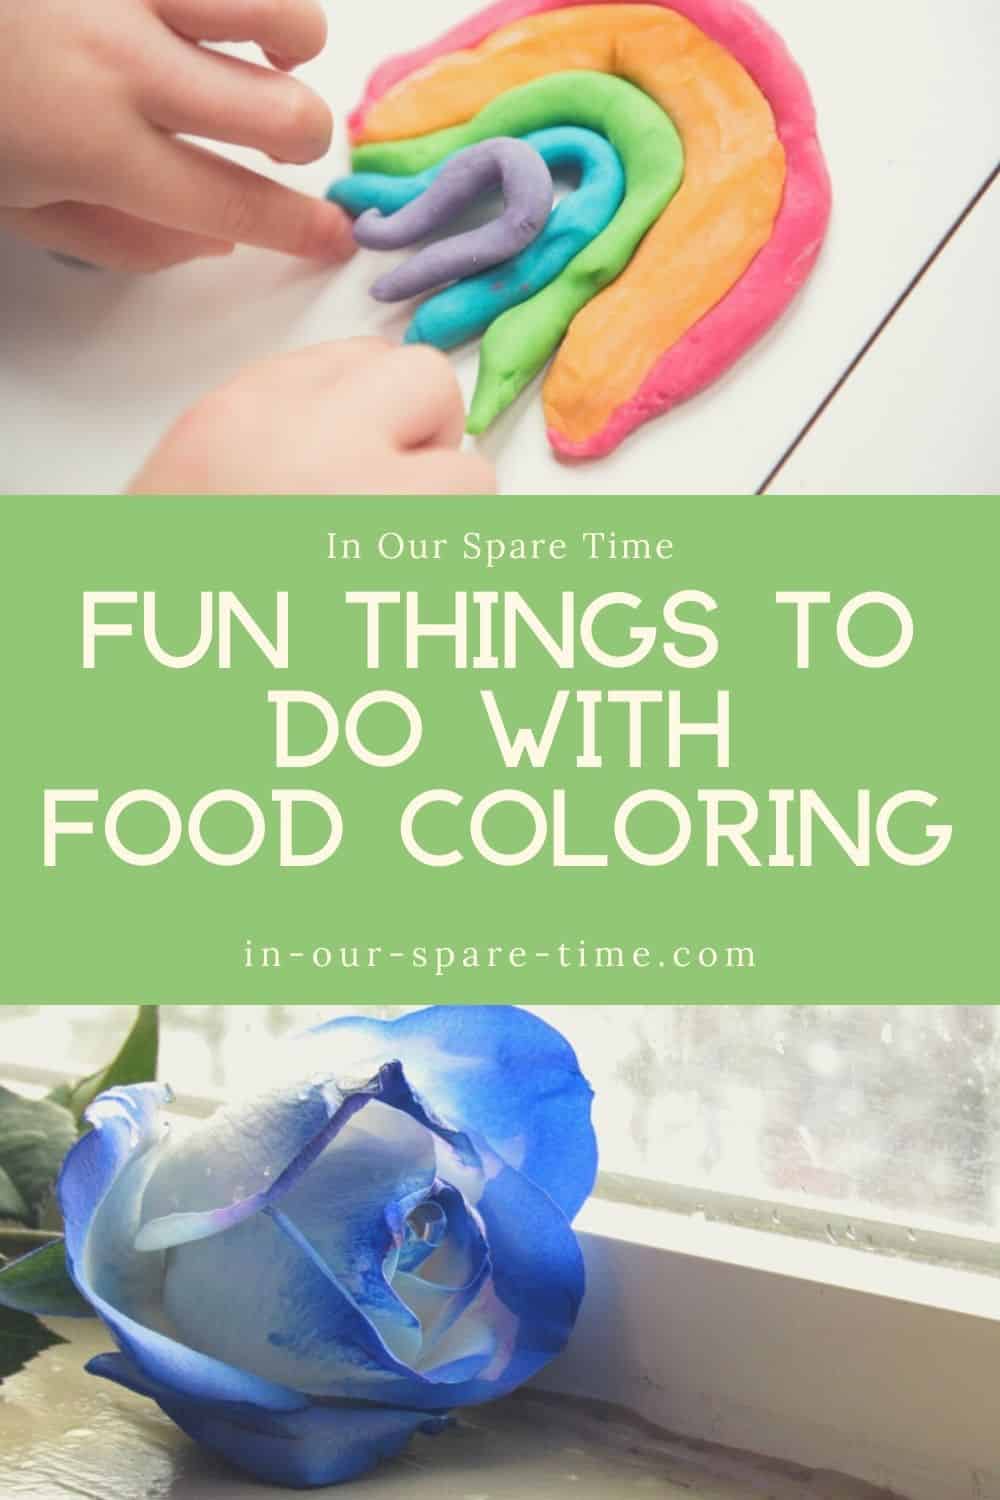 There are so many fun things that kids can do with food coloring. But it's hard to find good ideas of what they can make online. I've found some great recipes for DIY crafts you can make at home using common household ingredients and food coloring. I hope these will inspire kids to get creative in the kitchen!